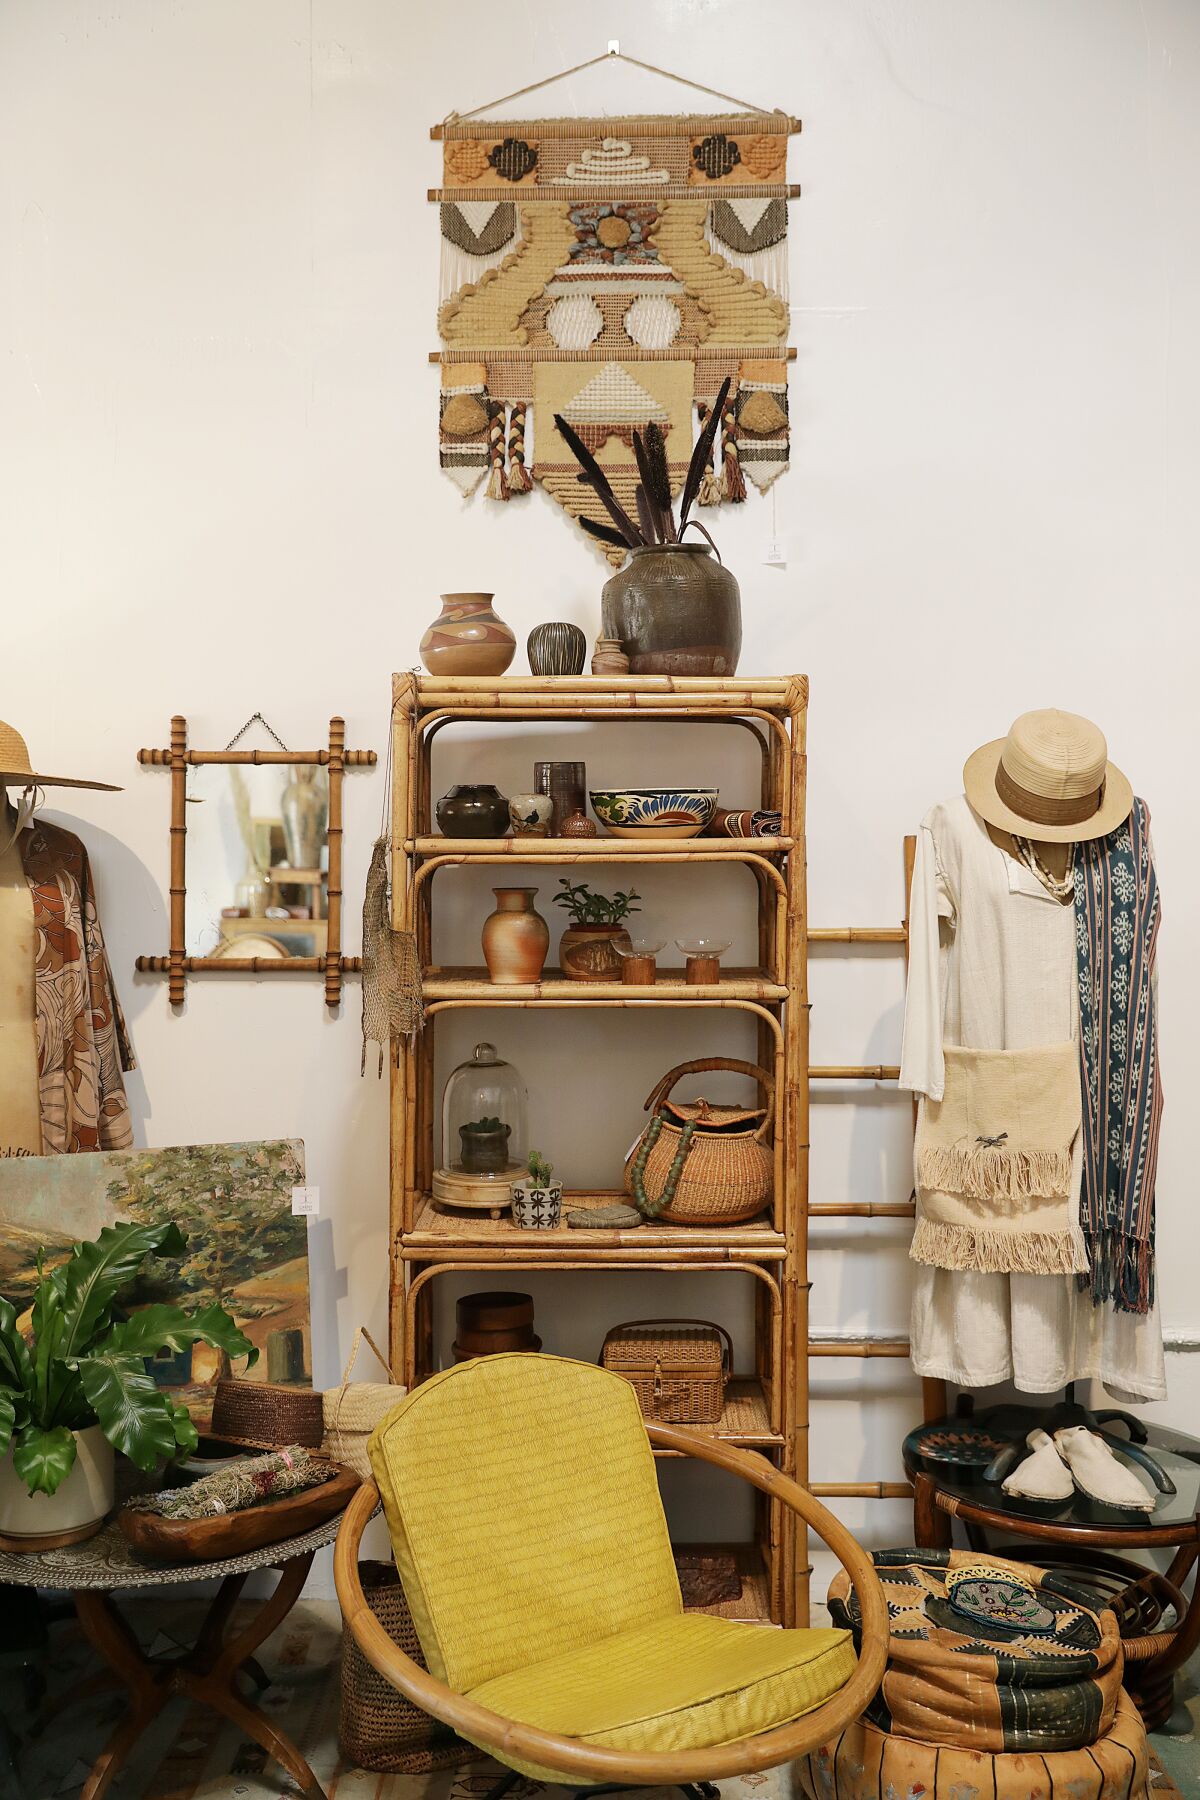 Vintage clothing, ceramics and housewares at Carny Couture in West Adams.